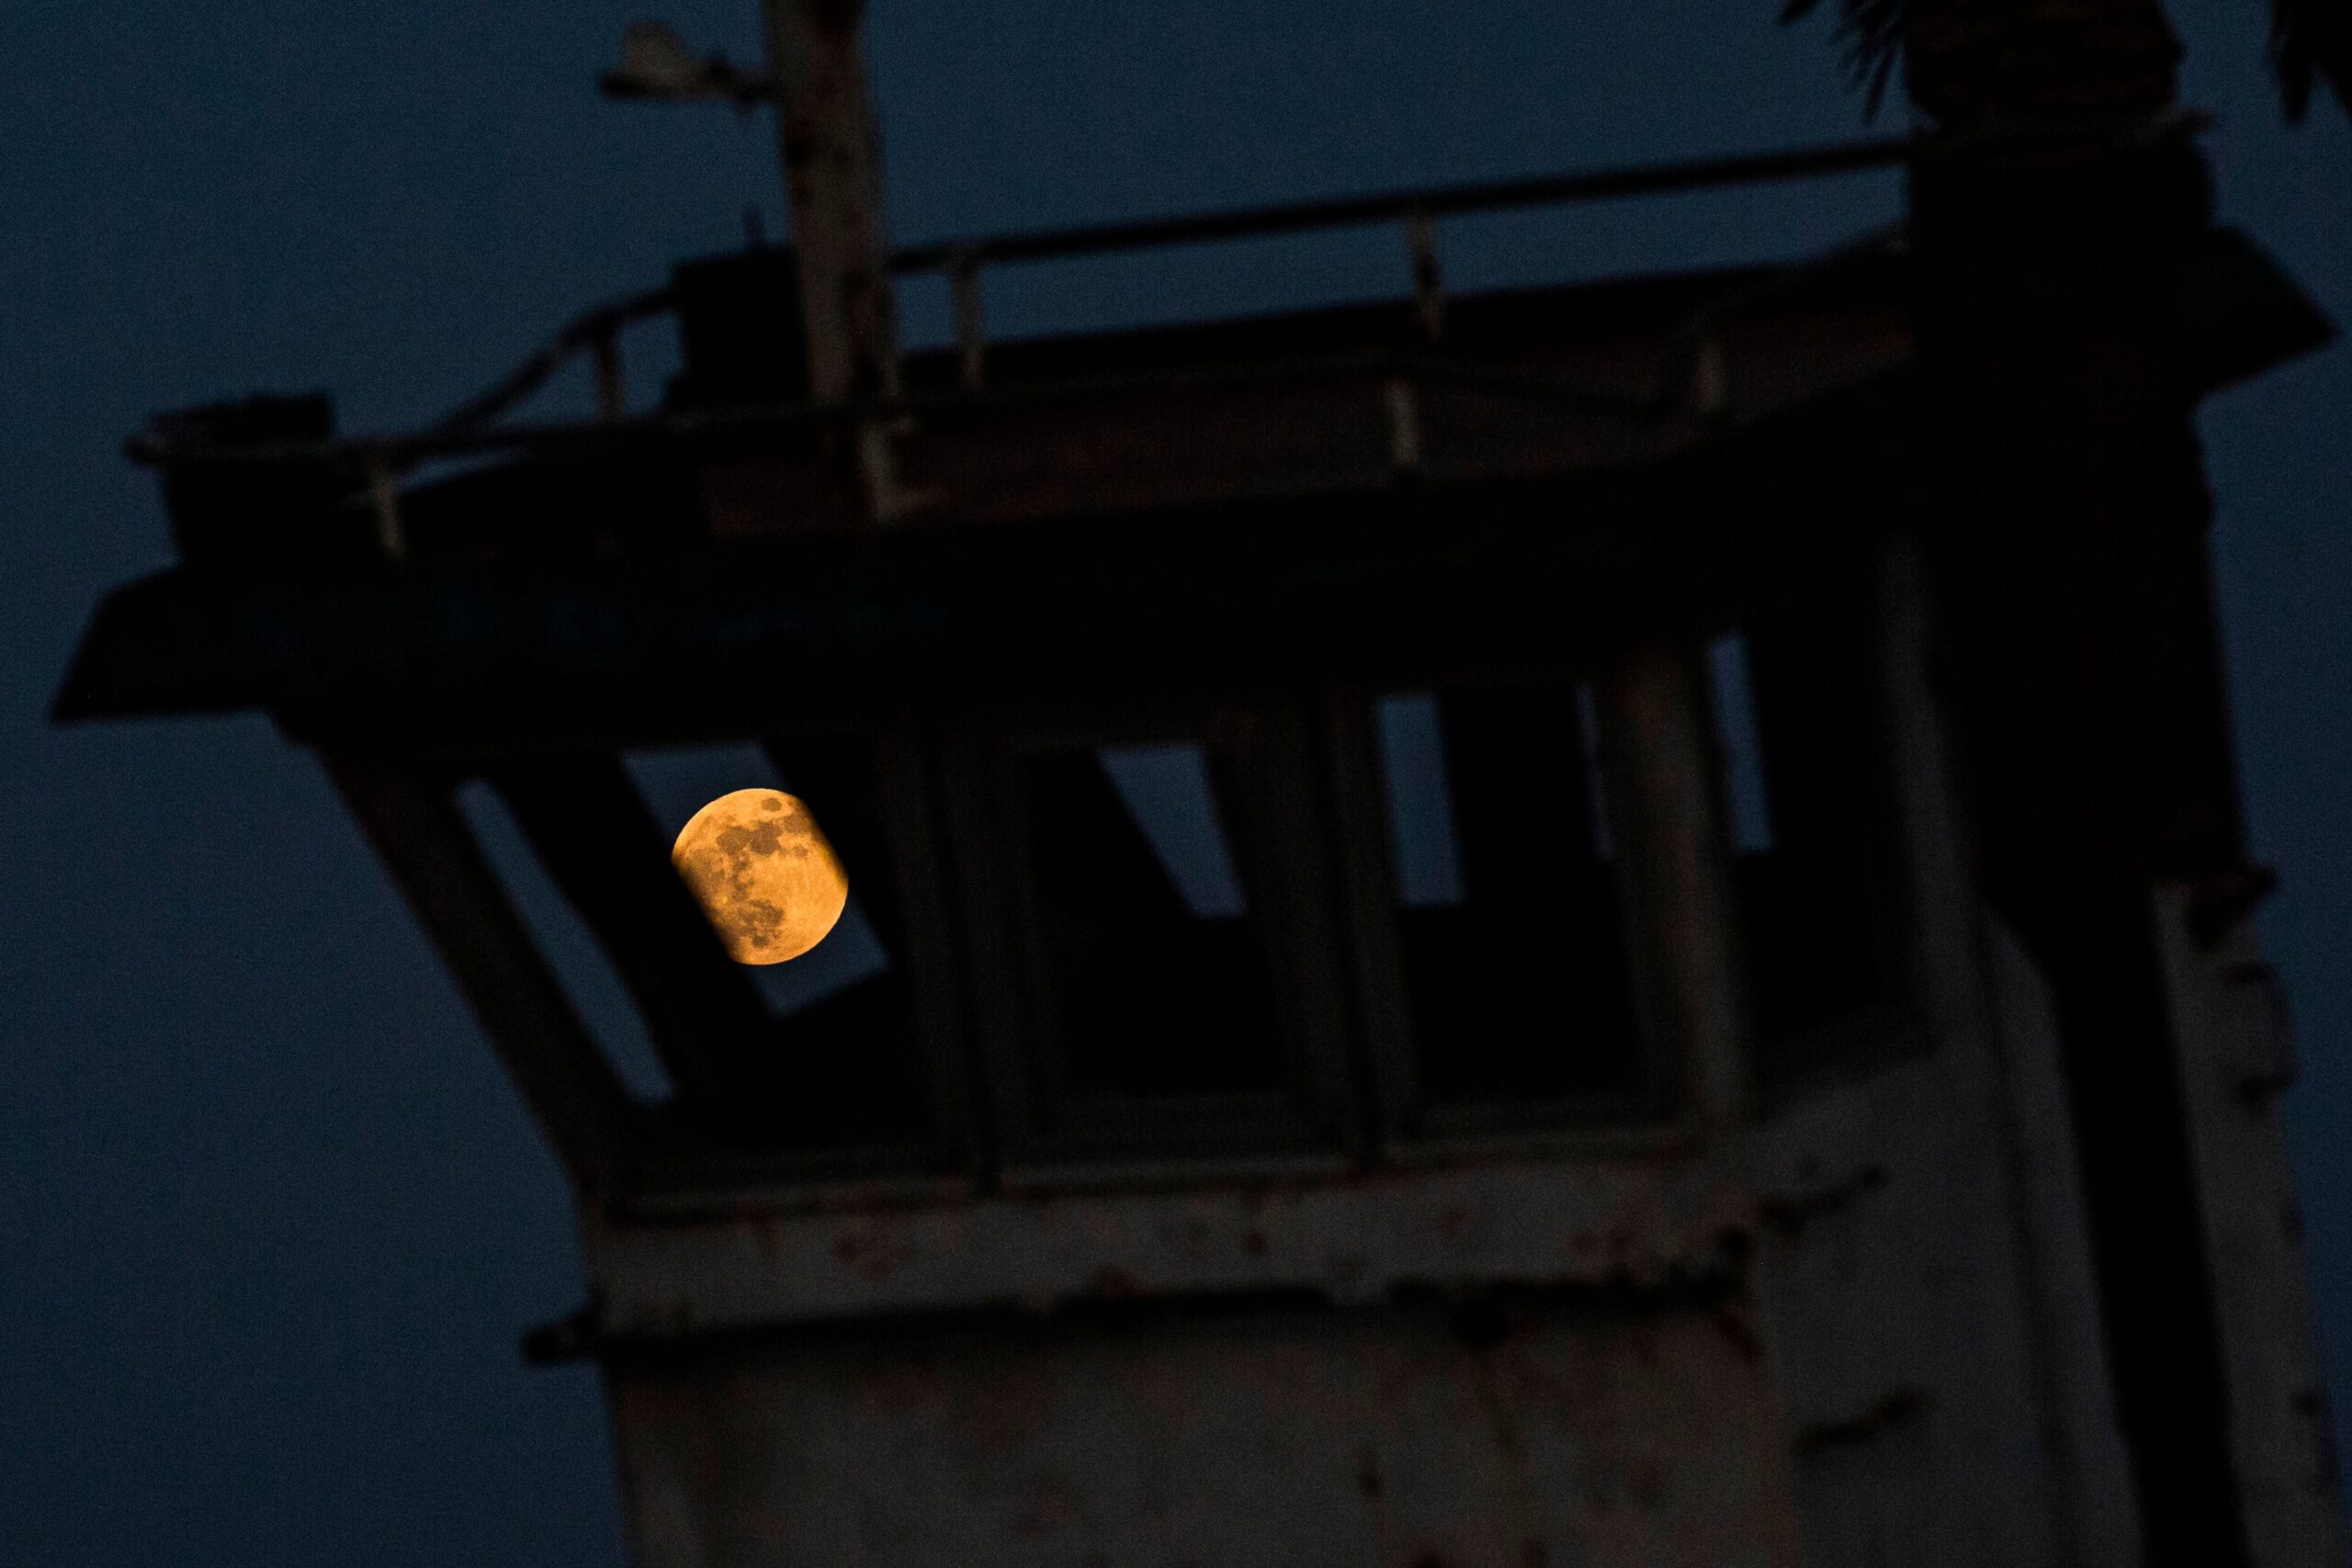 This picture taken on June 5, 2020 shows a view of the full moon during the "Strawberry Moon" lunar eclipse in the sky behind an old grounded boat, over Iraq's southern port city of Basra. (Photo by Hussein FALEH / AFP) (Photo by HUSSEIN FALEH/AFP via Getty Images)